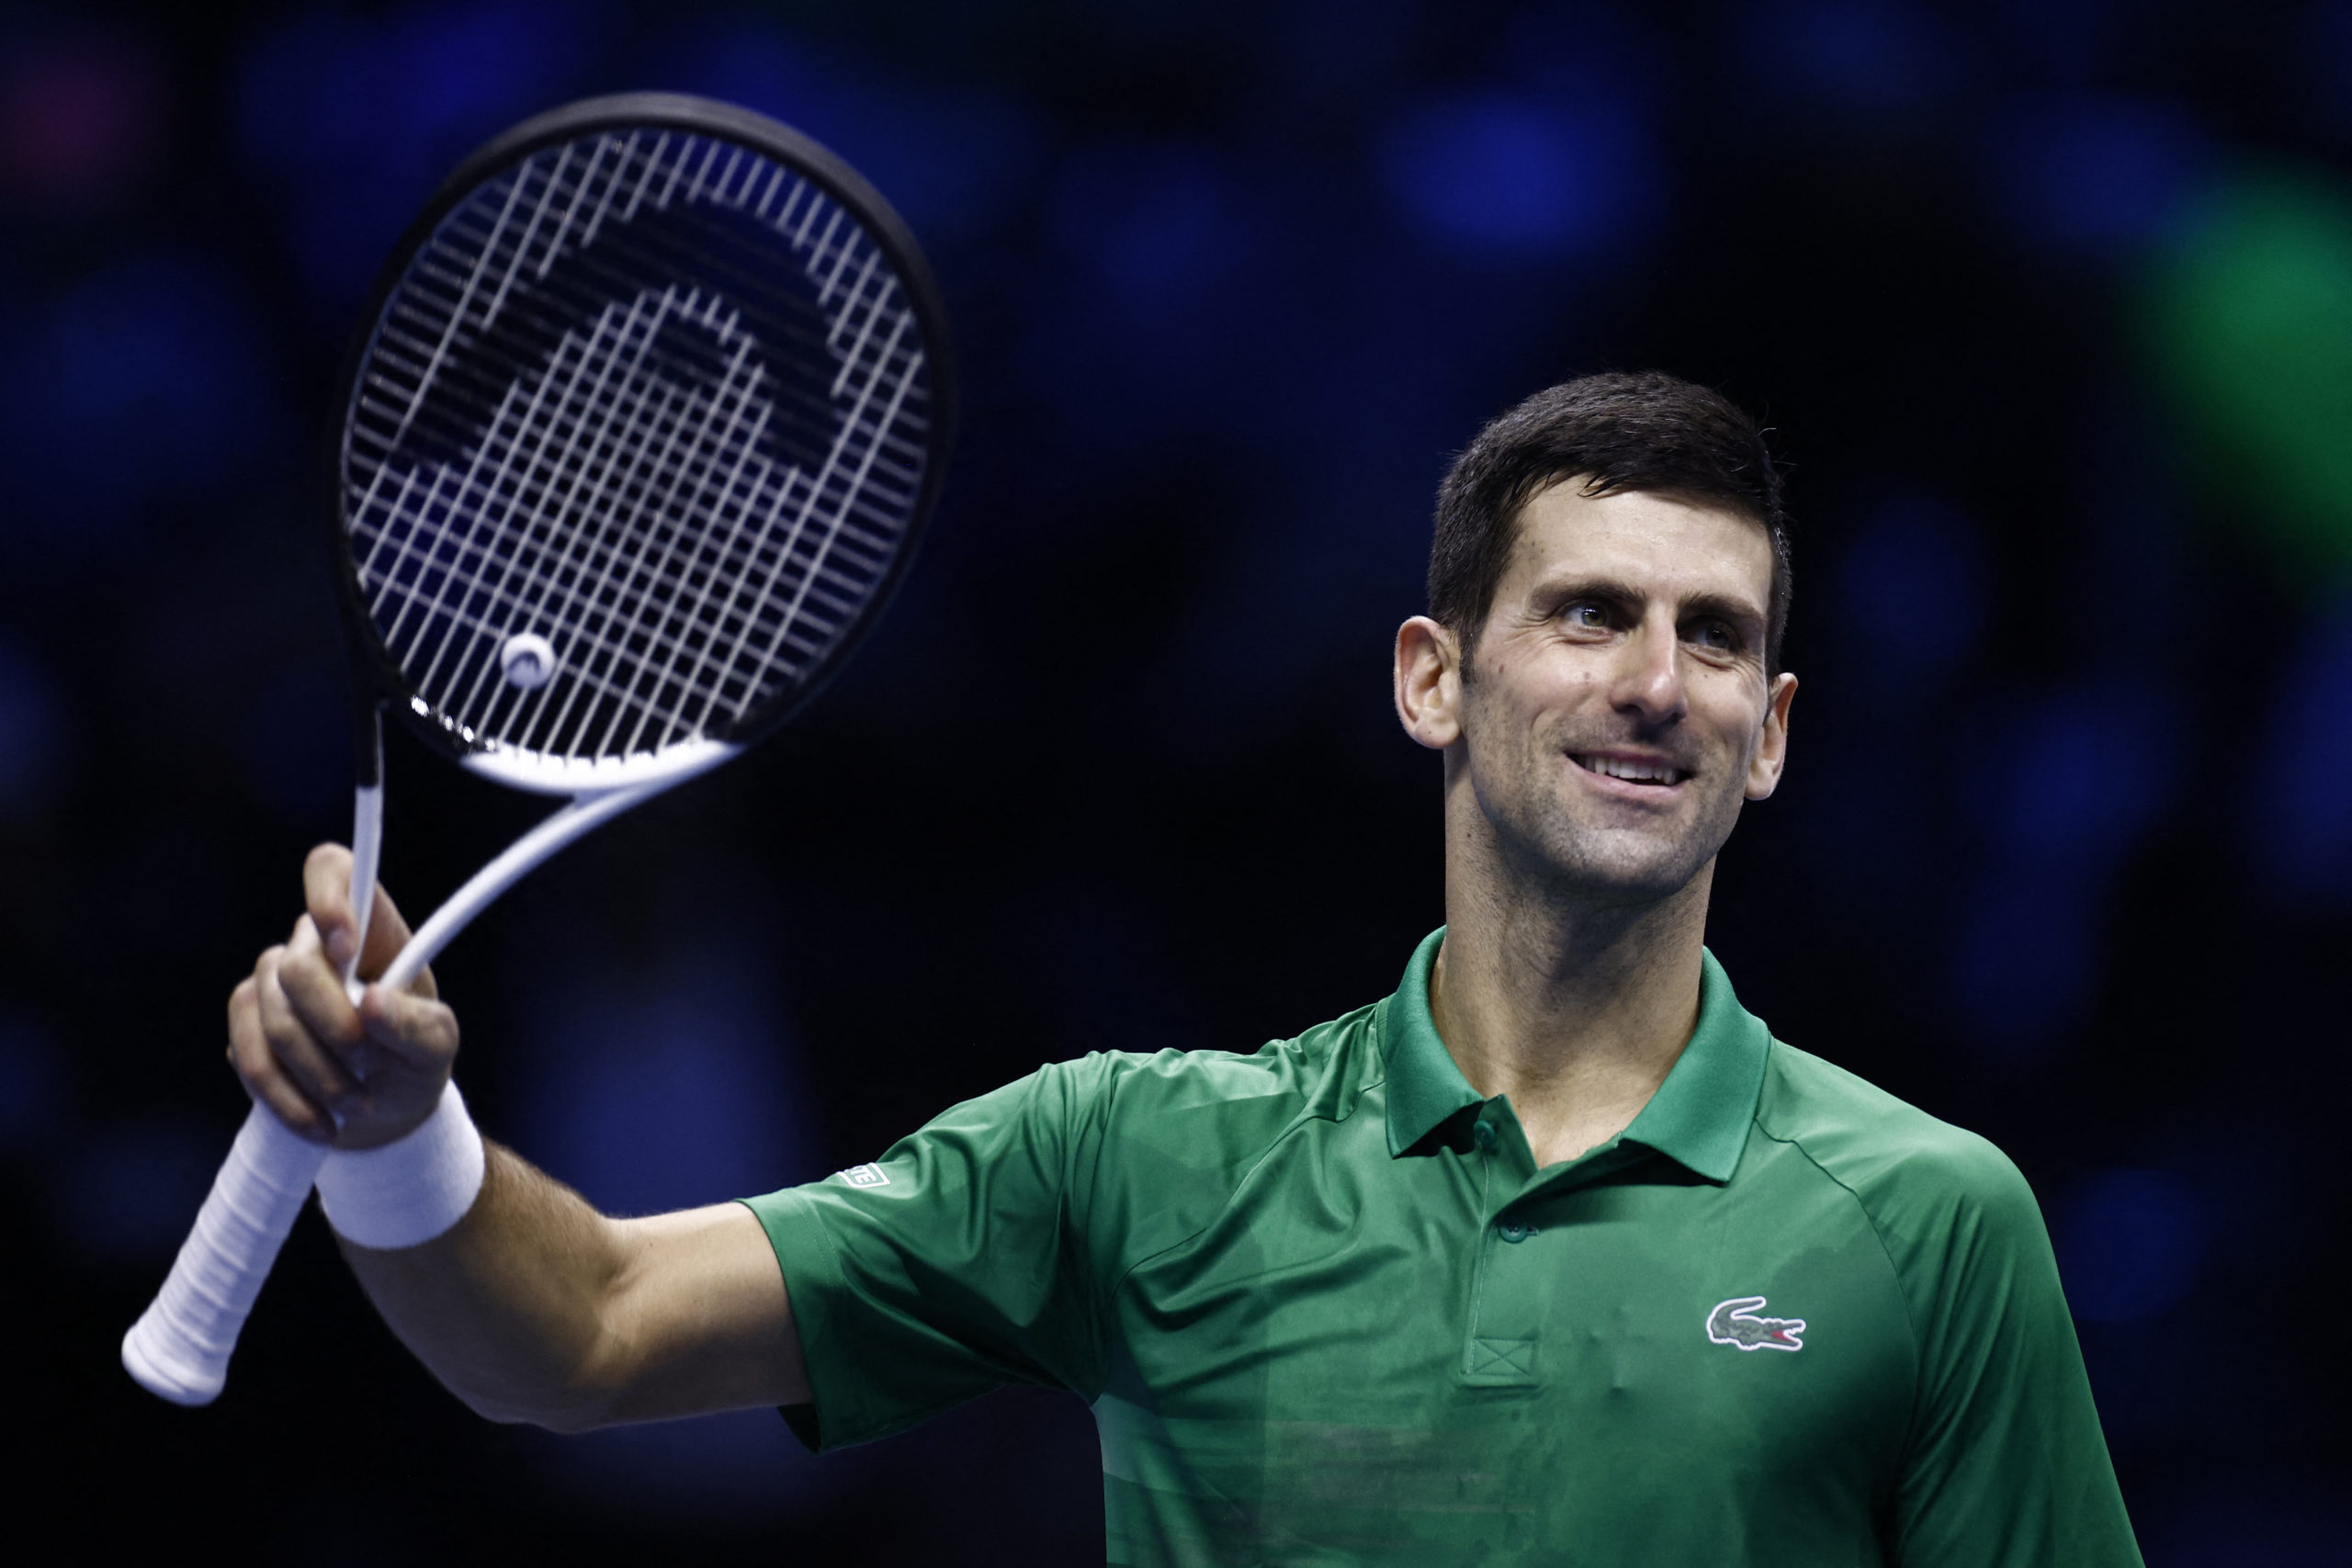 Tennis - ATP Finals Turin - Pala Alpitour, Turin, Italy - November 16, 2022  Serbia's Novak Djokovic celebrates after winning his group stage match against Russia's Andrey Rublev 